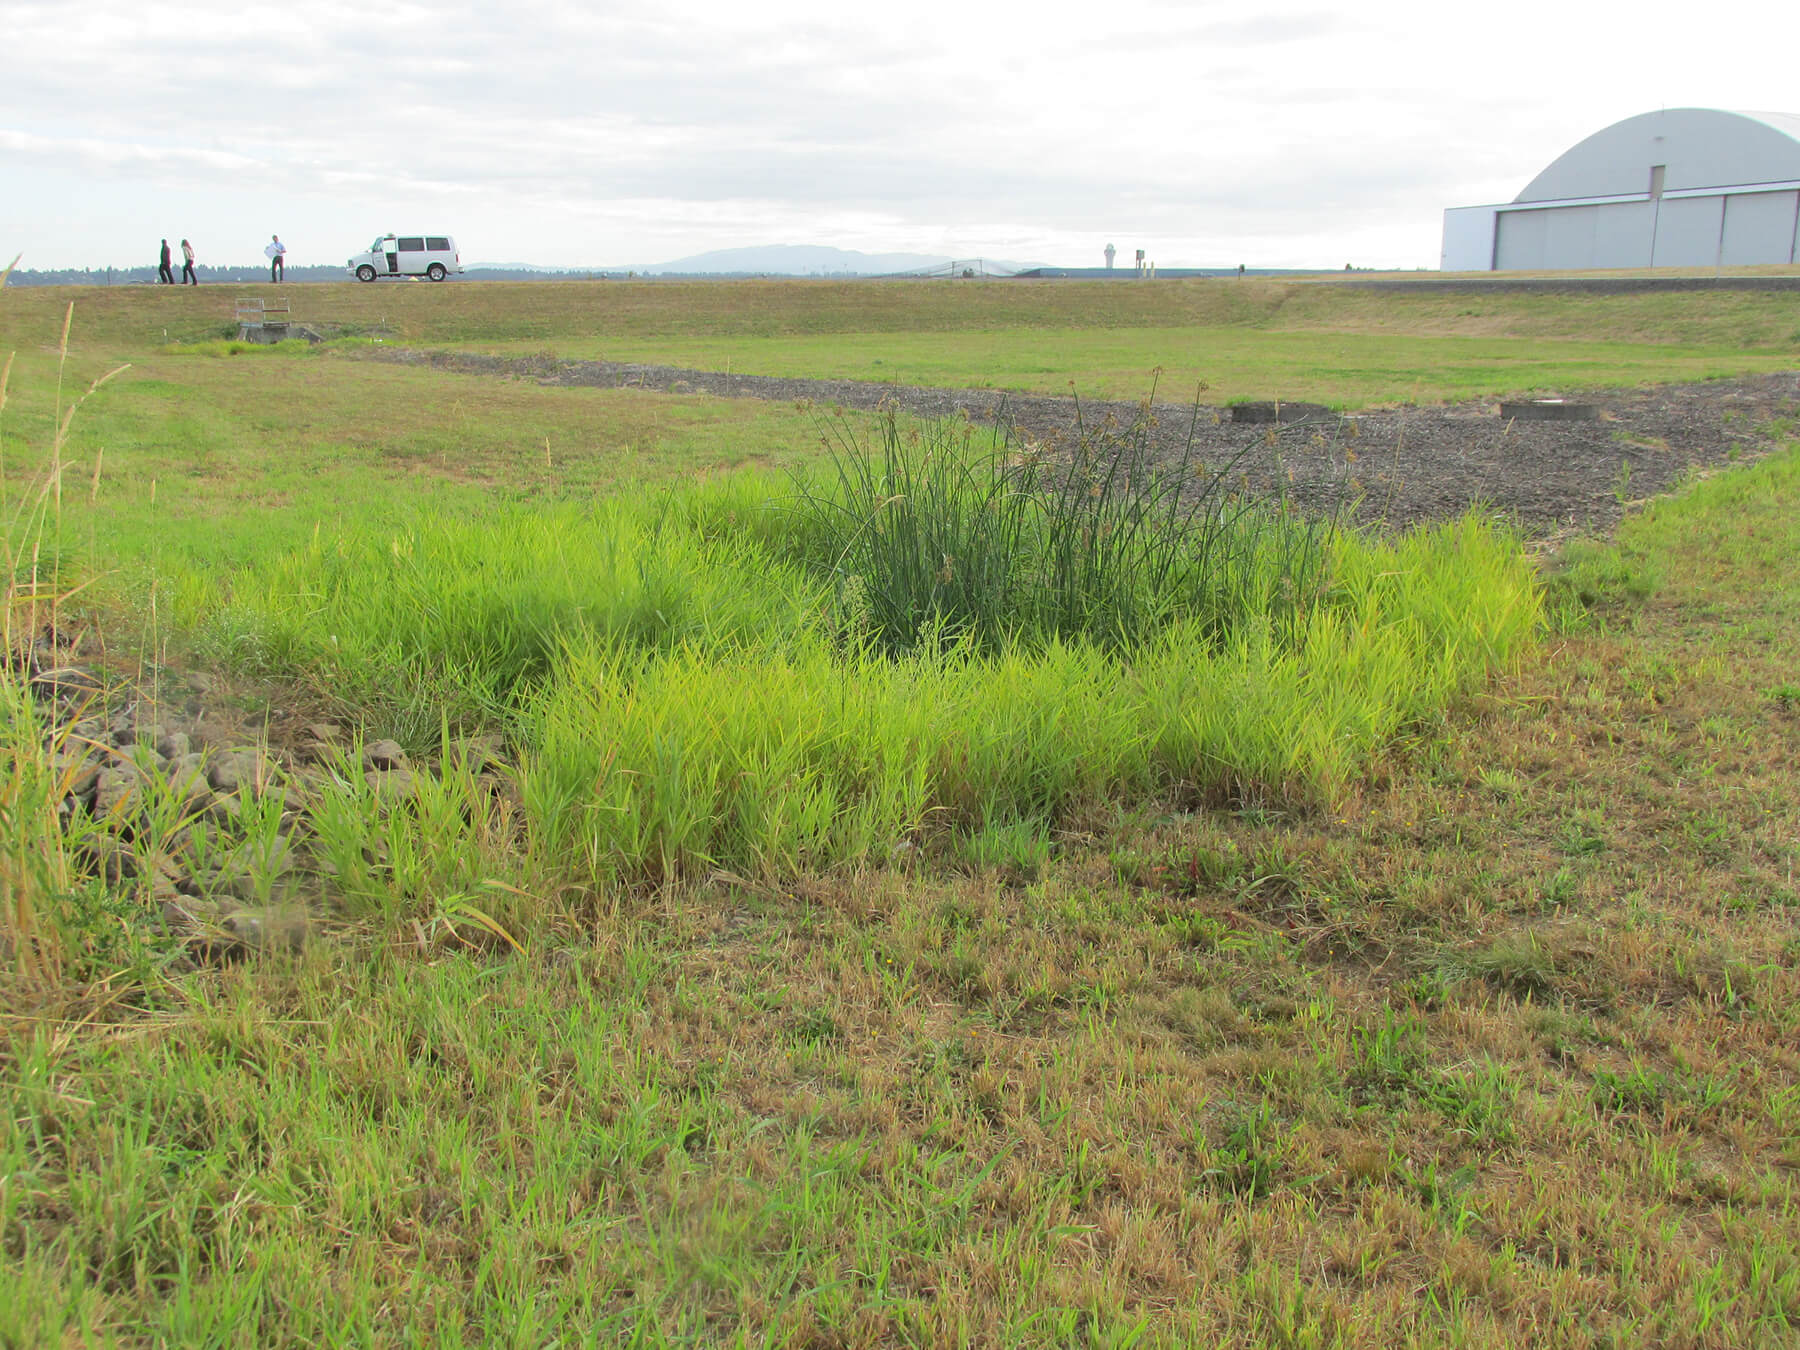 Green infrastructure components seen in field near airport